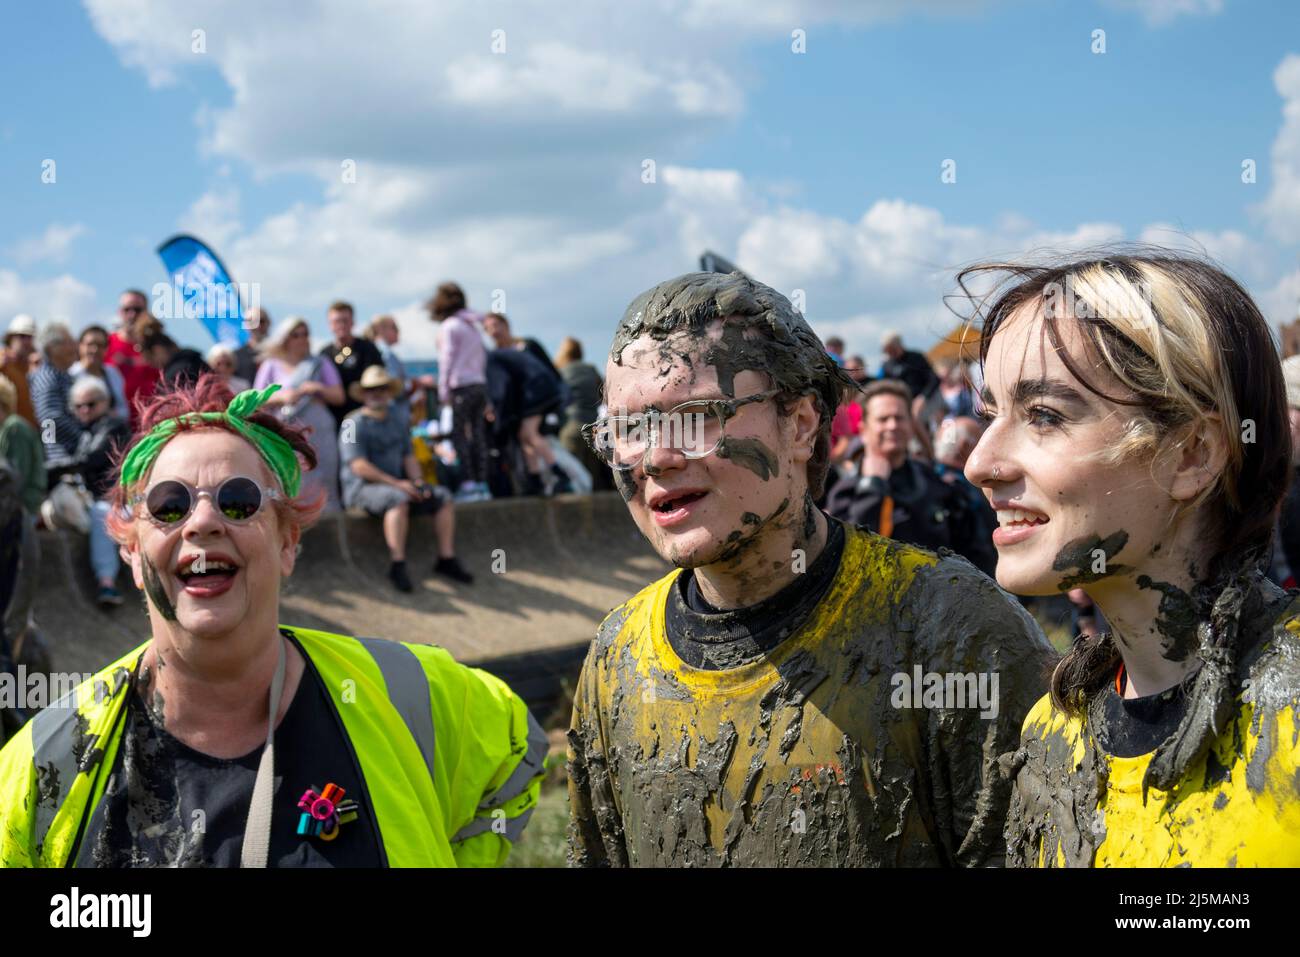 Jo Brand, joined with Alfie Richer and Maisi Bourke (daughter of Jo Brand), after they completed the Maldon Mud Race, Essex, UK. Covered in mud Stock Photo